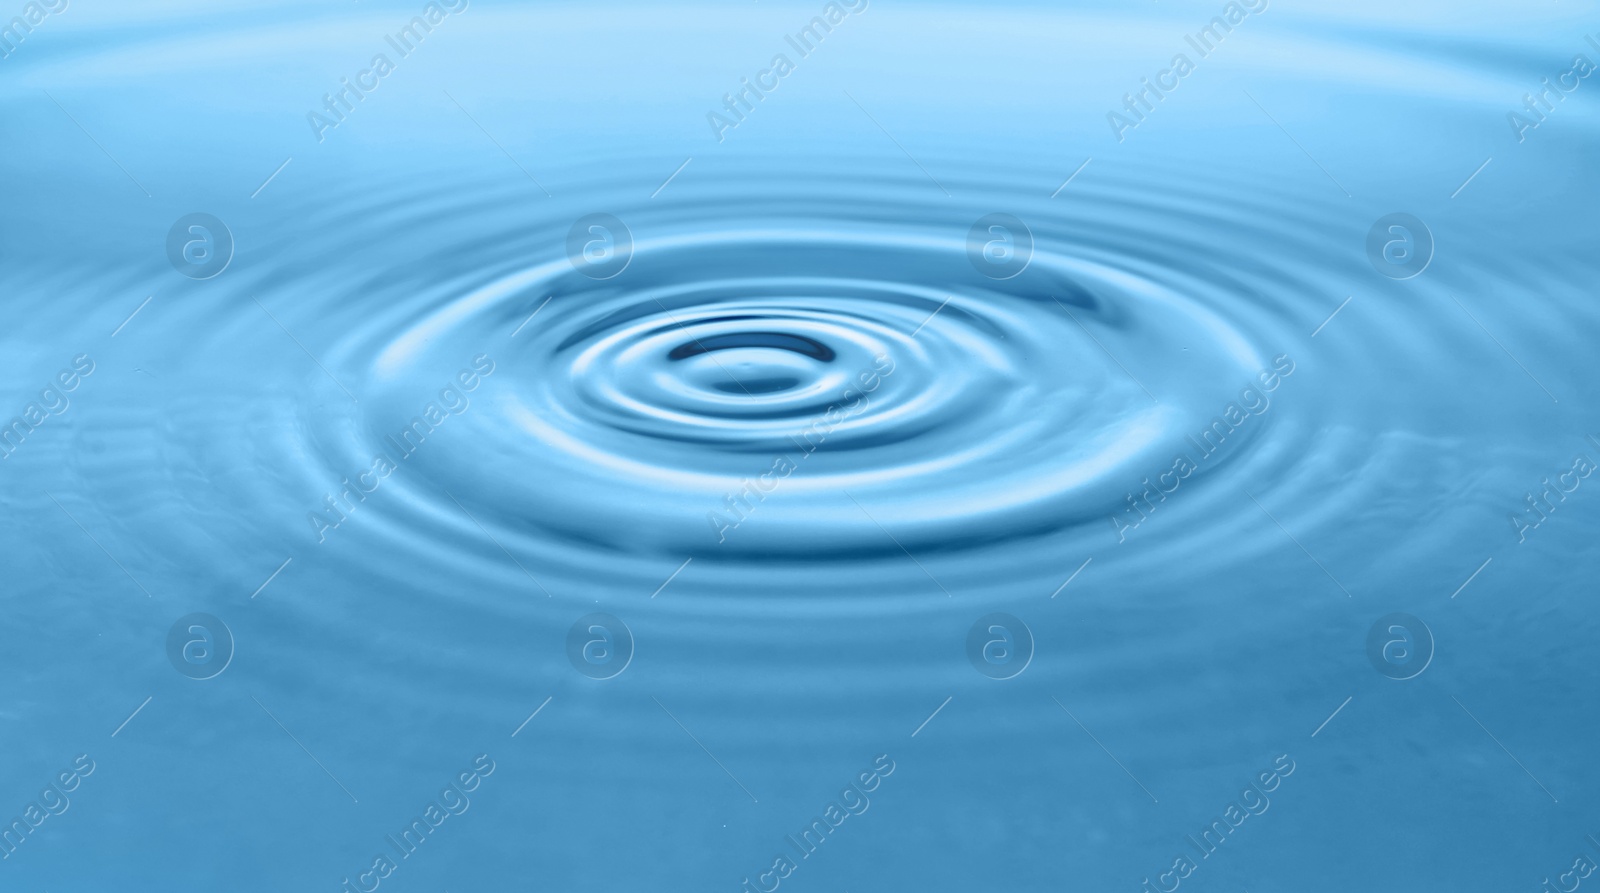 Photo of Blue water with concentric waves as background, closeup